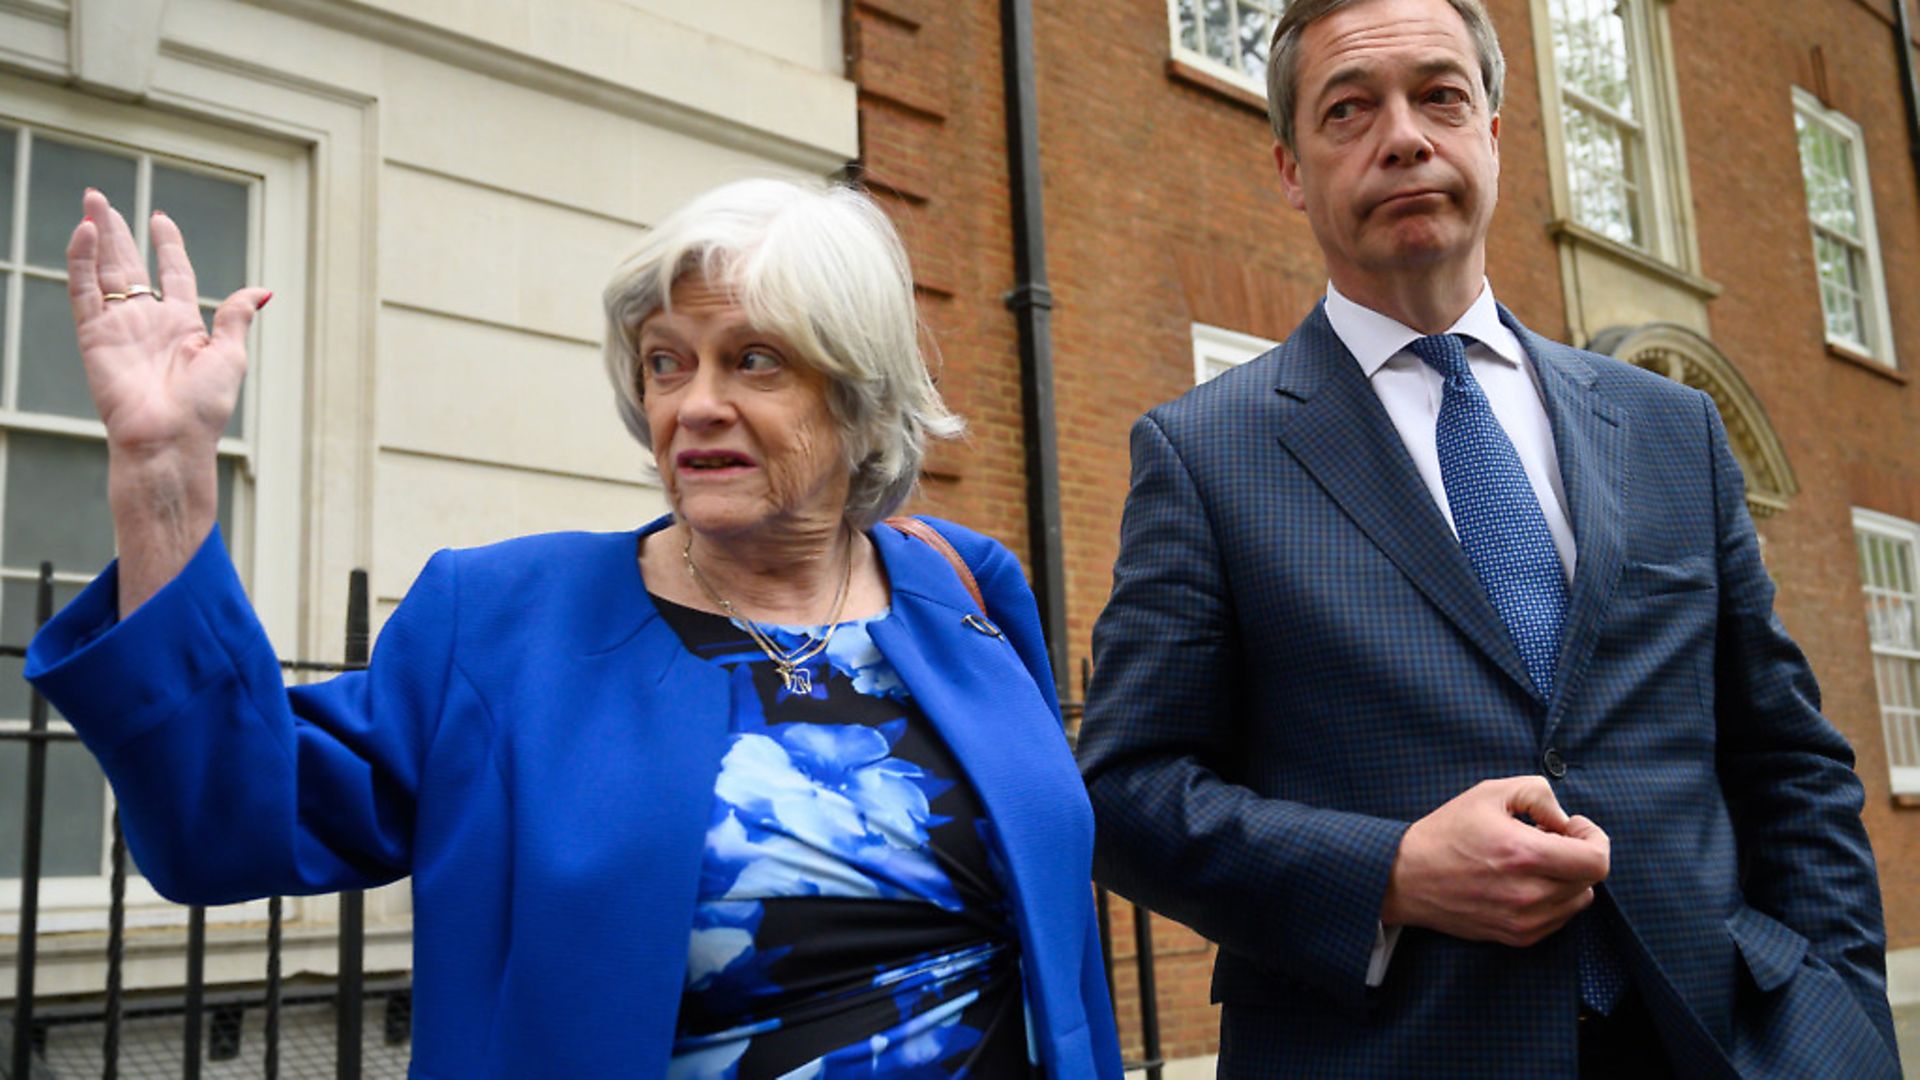 Ann Widdecombe and Nigel Farage pose ahead of the European Elections.  (Photo by Leon Neal/Getty Images) - Credit: Getty Images